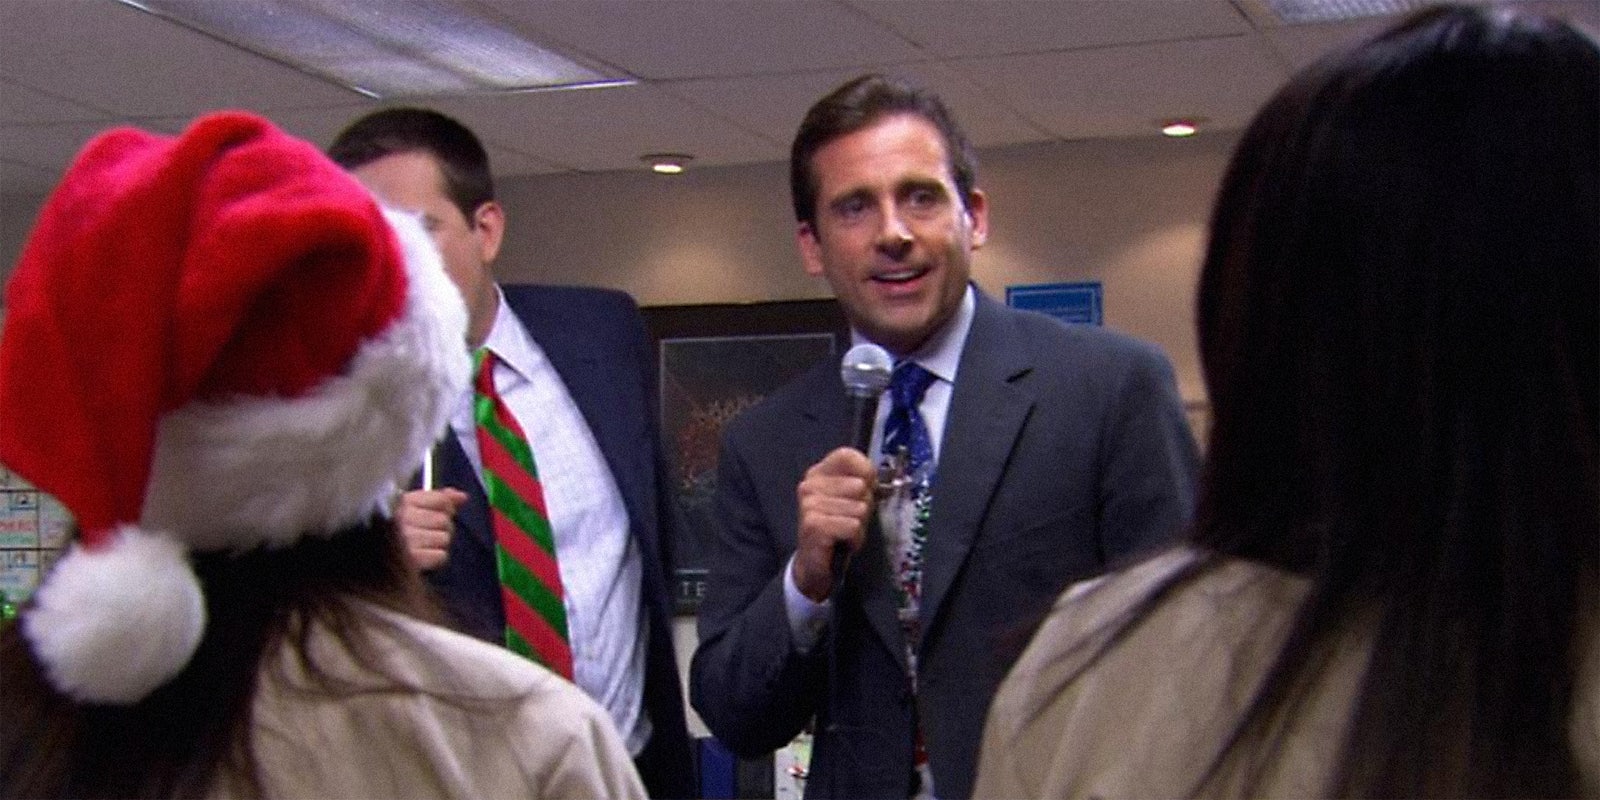 Michael Scott (played by Steve Carell) singing into a microphone.